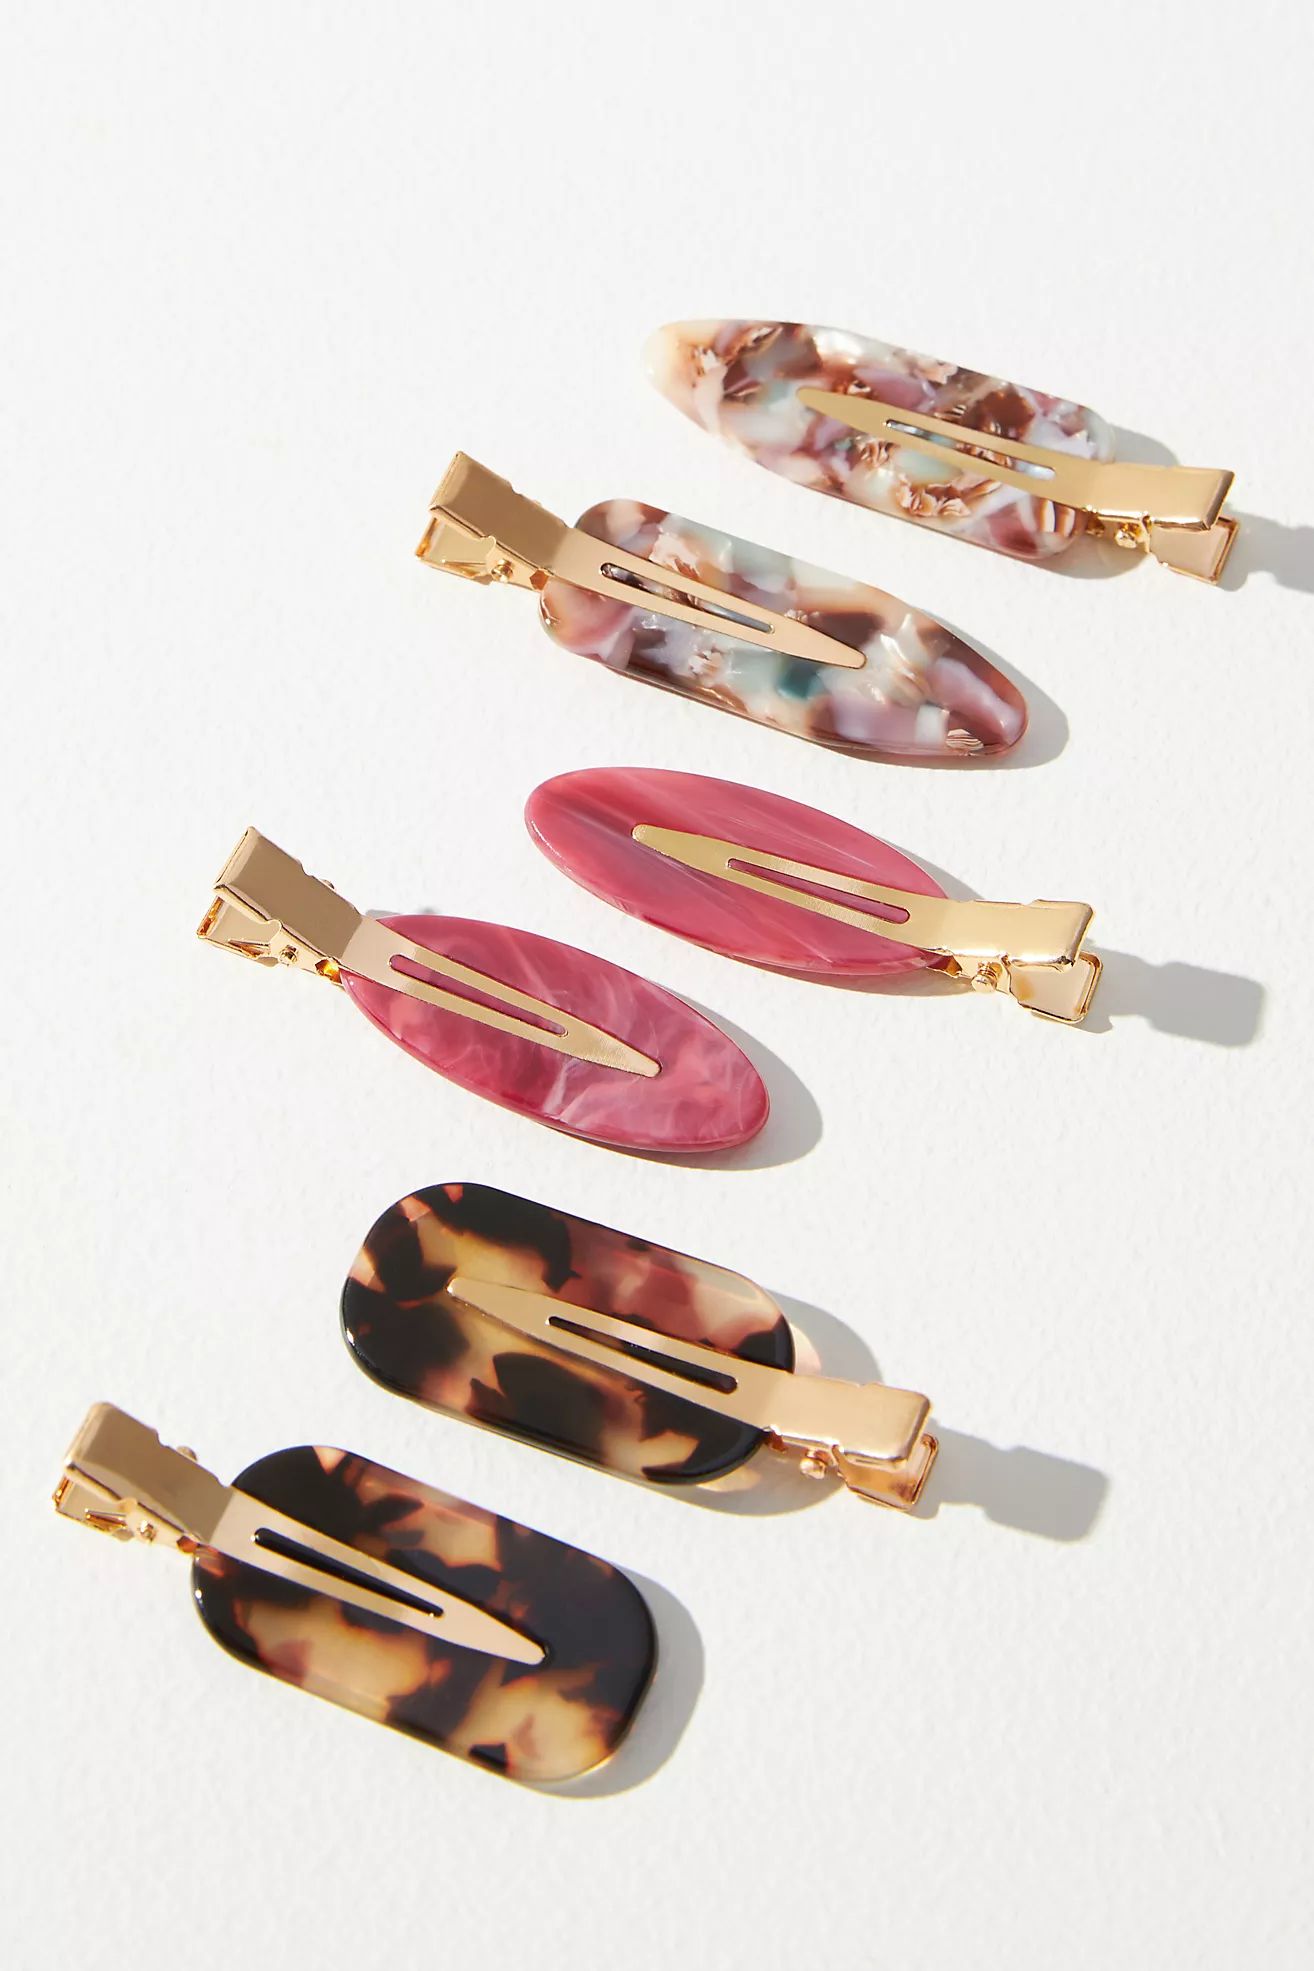 Resin Mixed Shapes Hair Clips, Set of 4 | Anthropologie (US)